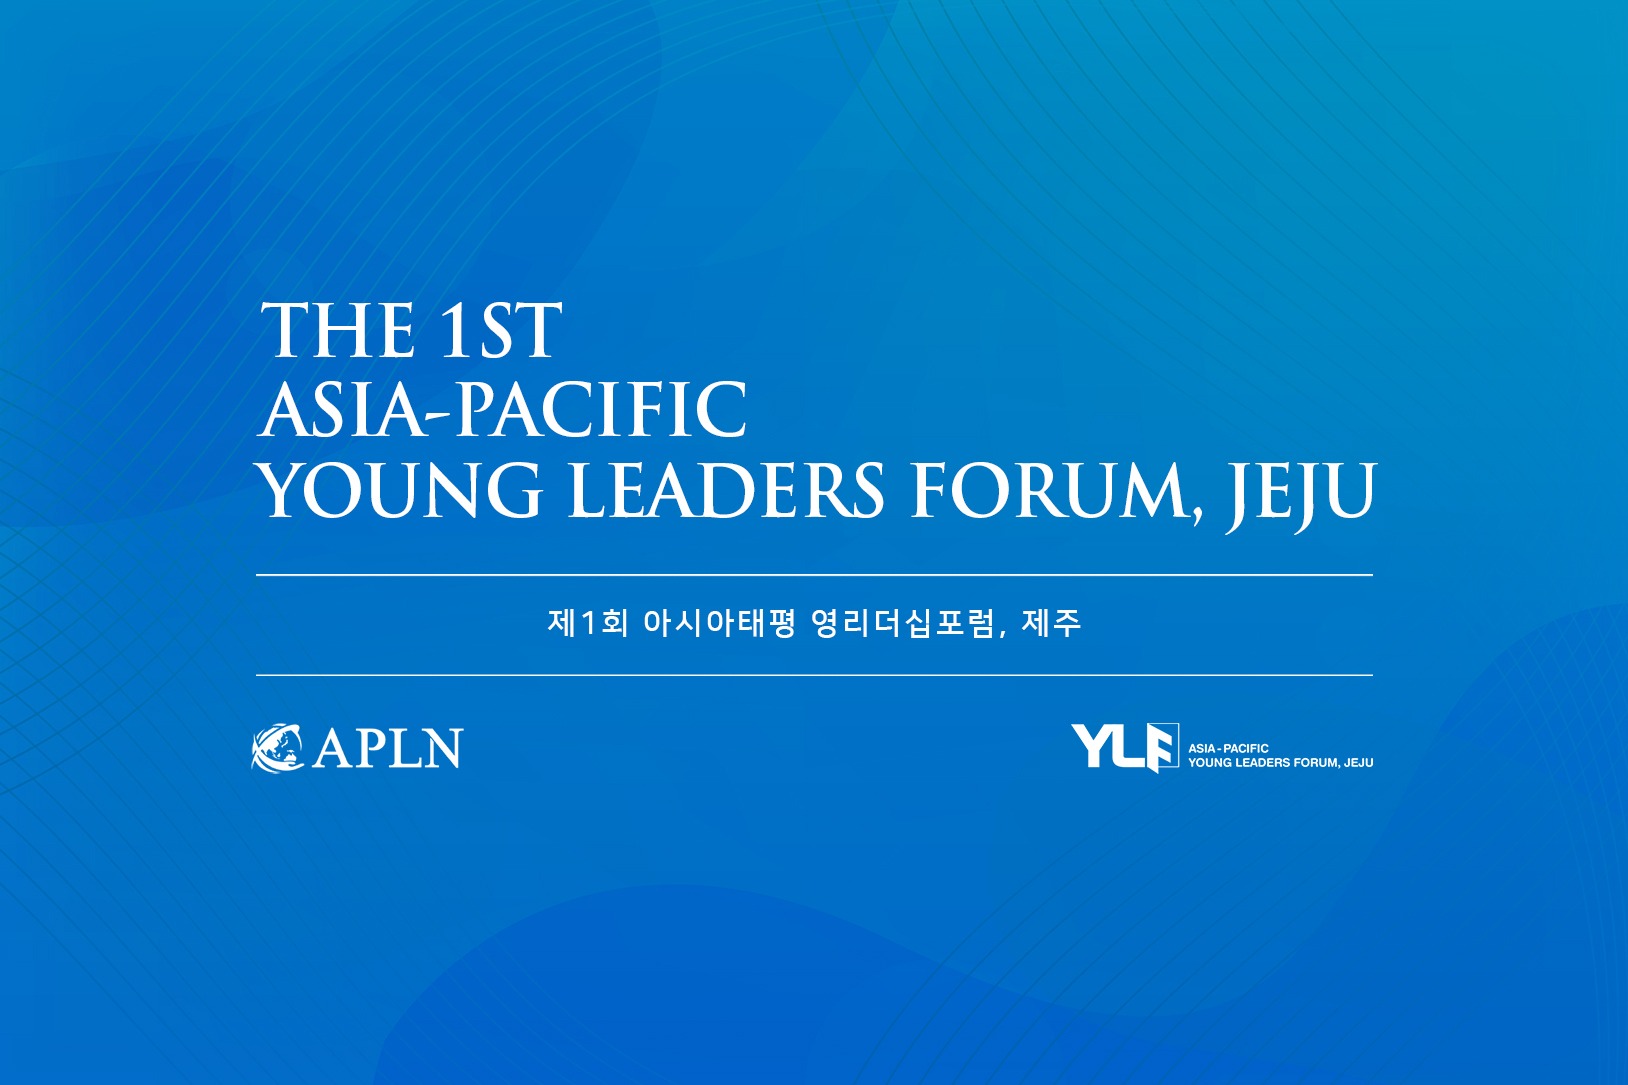 APLN at the Asia-Pacific Young Leaders Forum